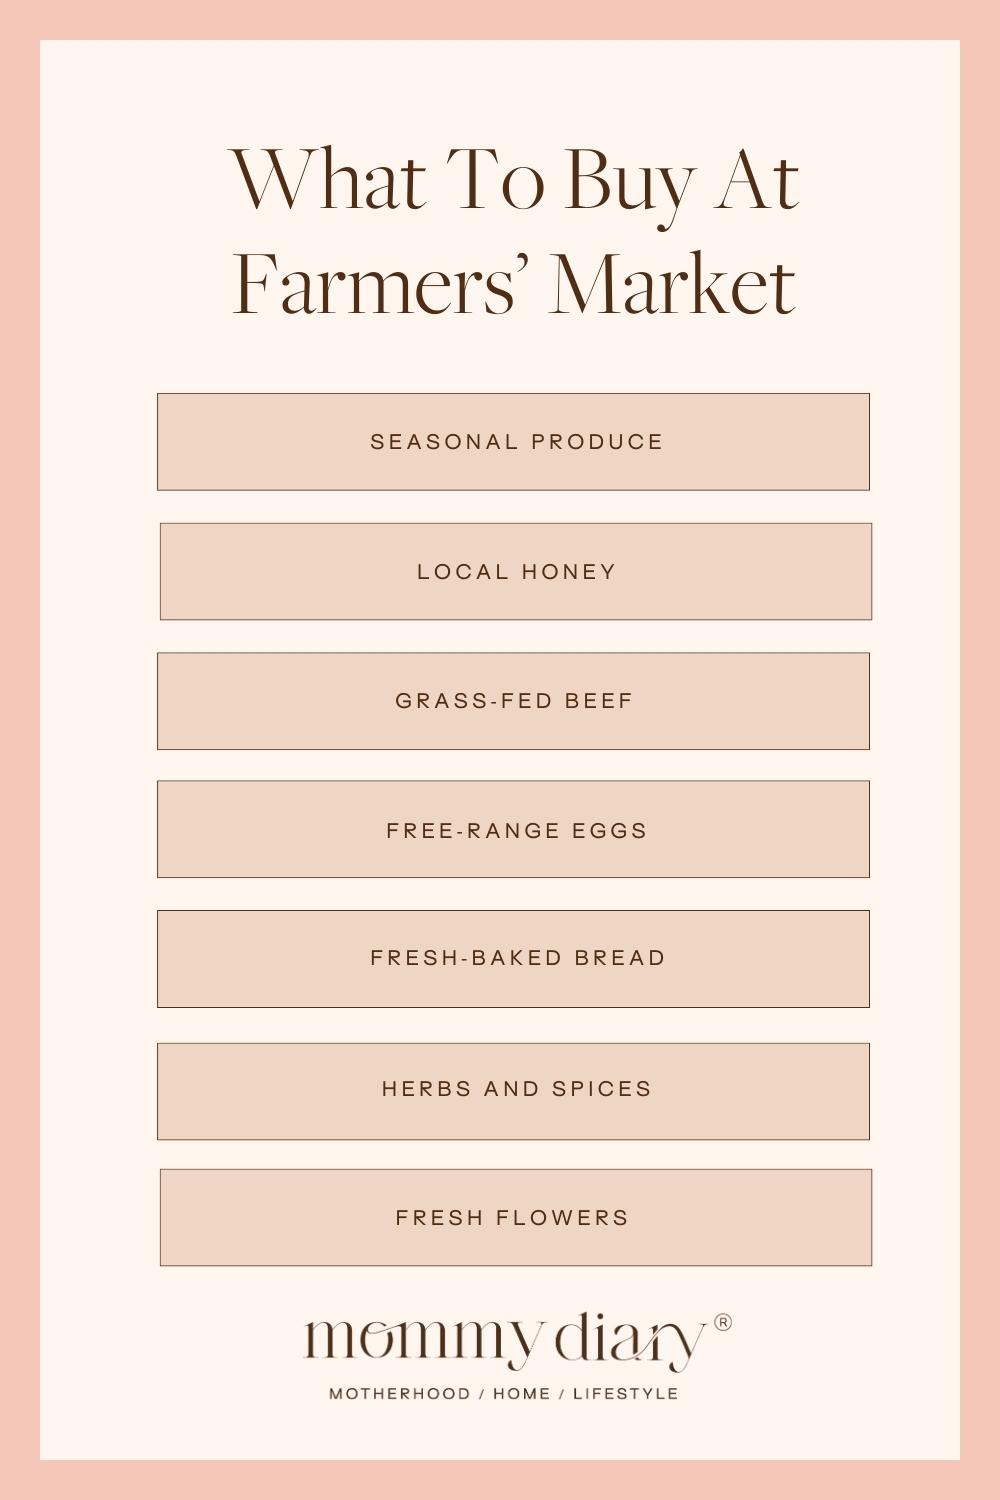 What To Buy At Farmers' Market List